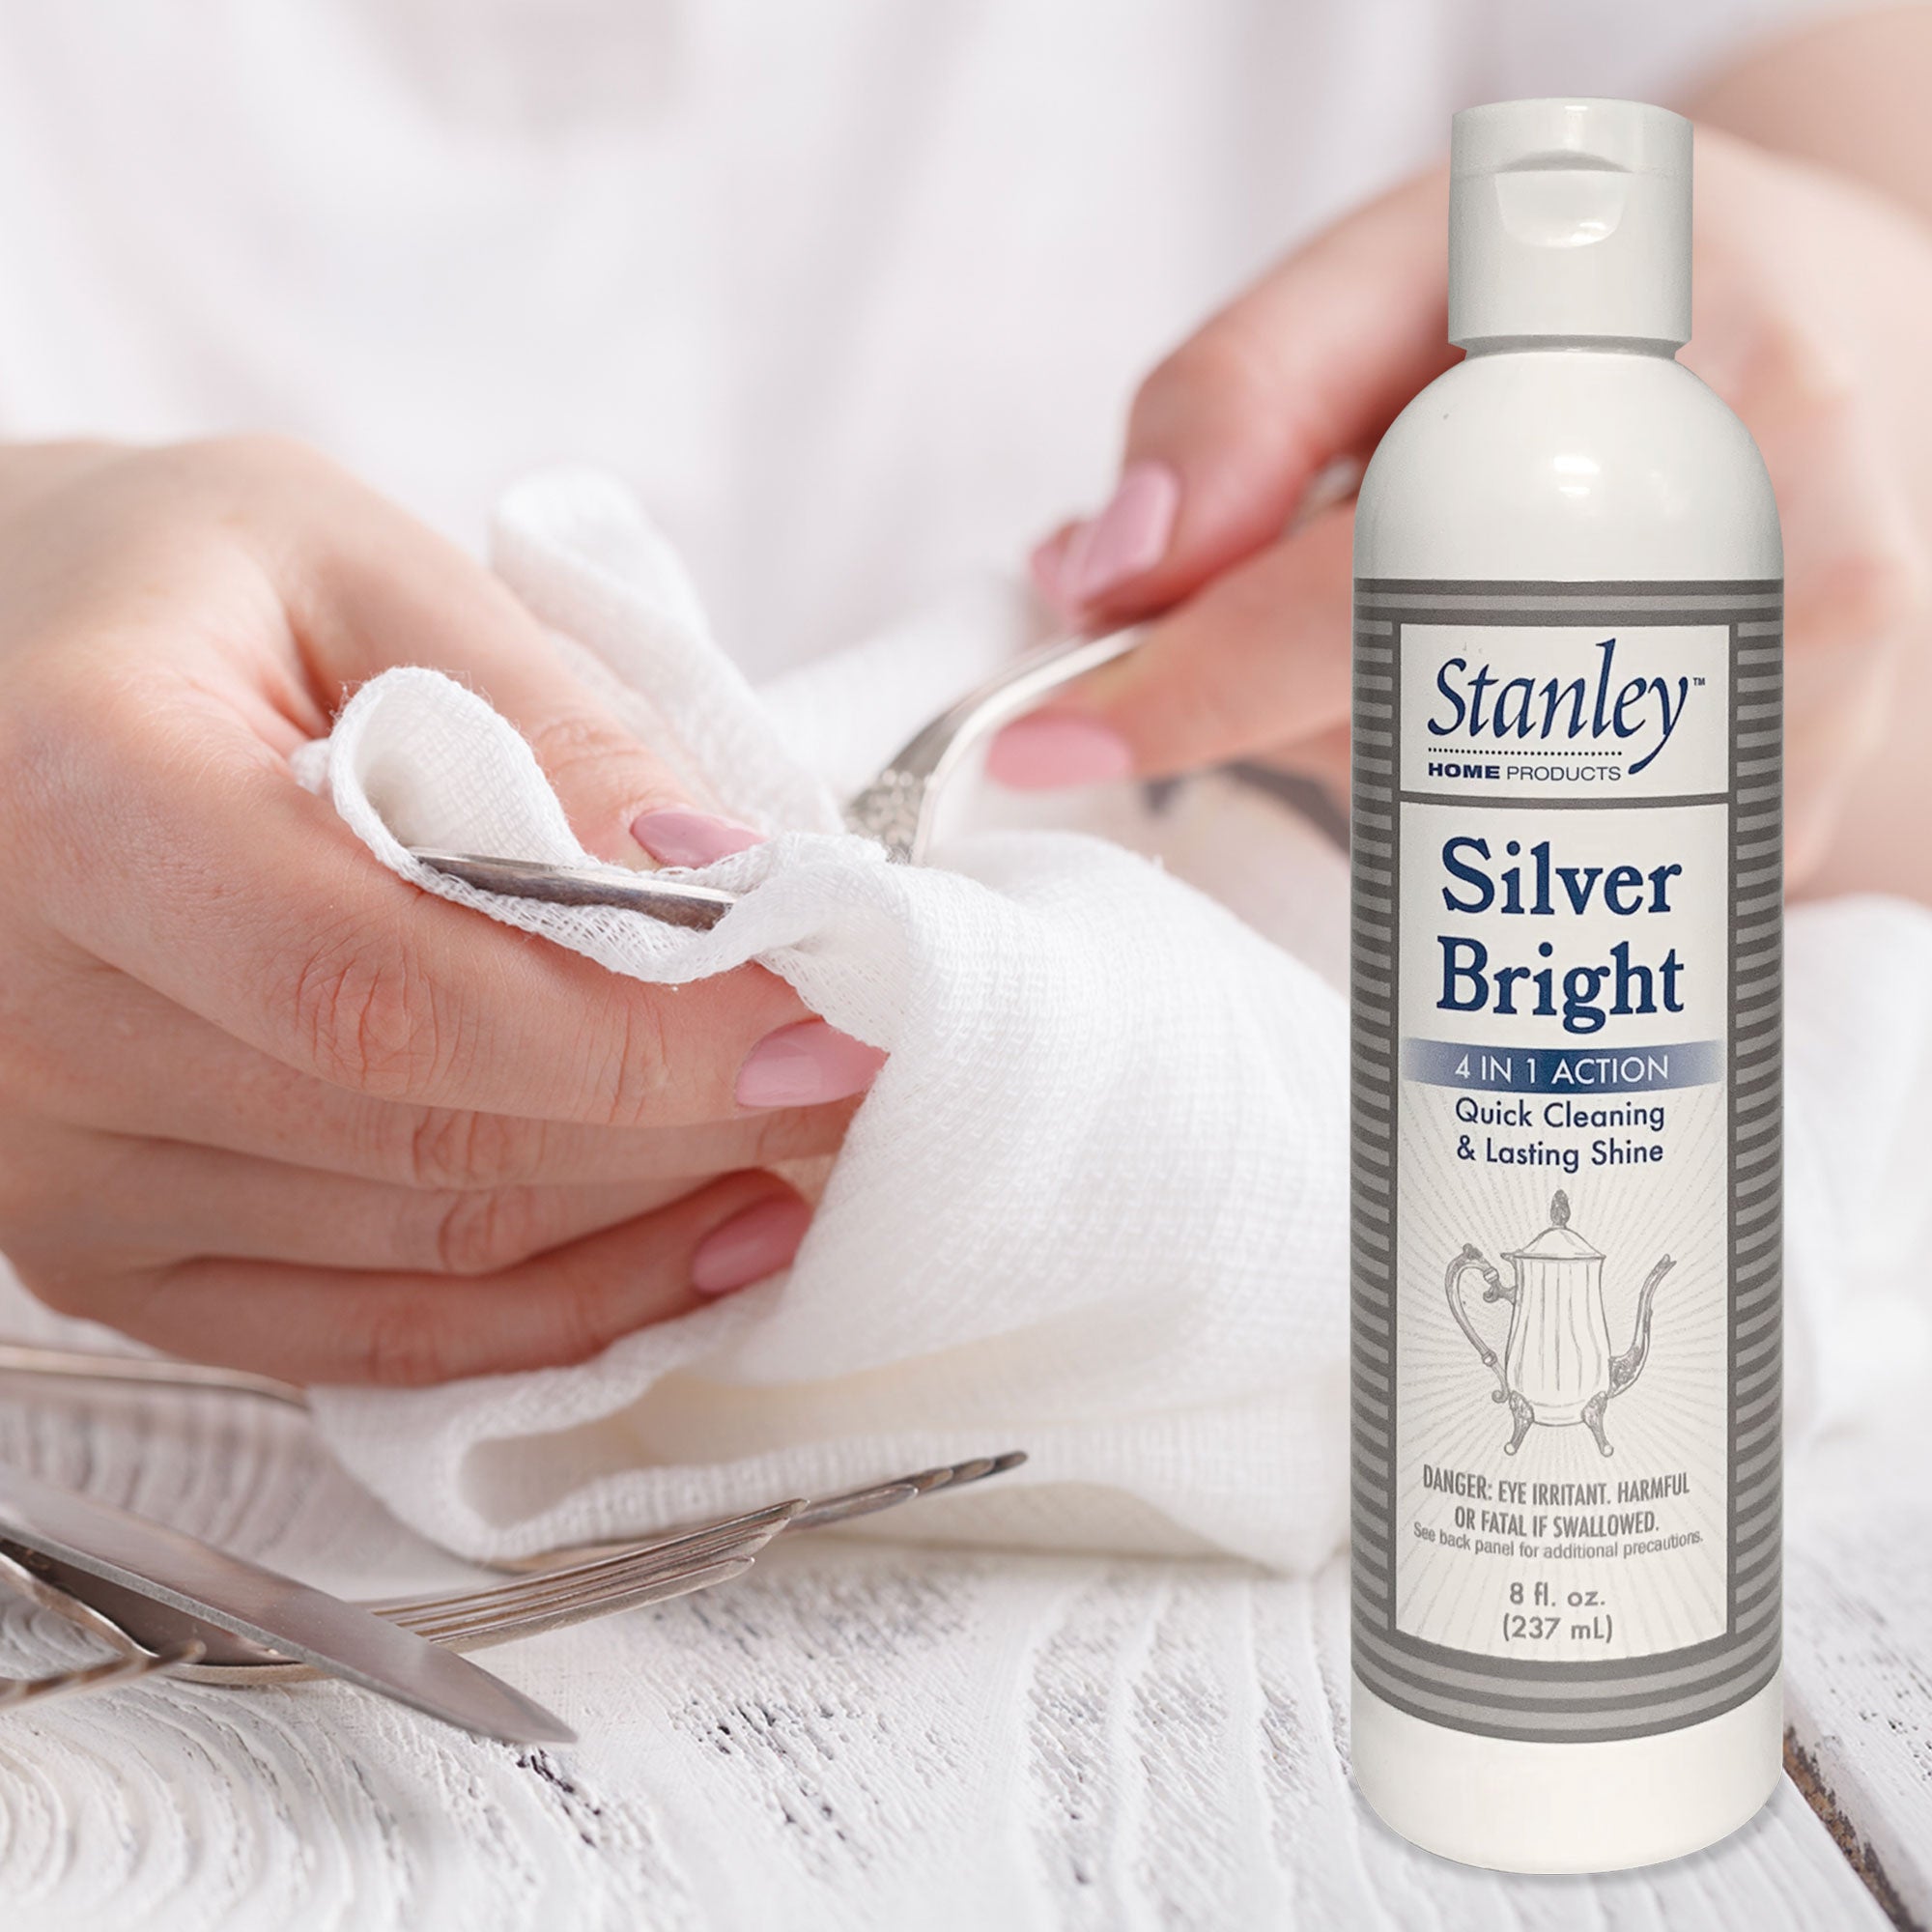 Stanley Home Silver Bright – Silver Cleaner & Polish – for Silver Plate, Sterling, Chrome, Fine Antique Silver – Safely Cleans, Removes Tarnish & Help